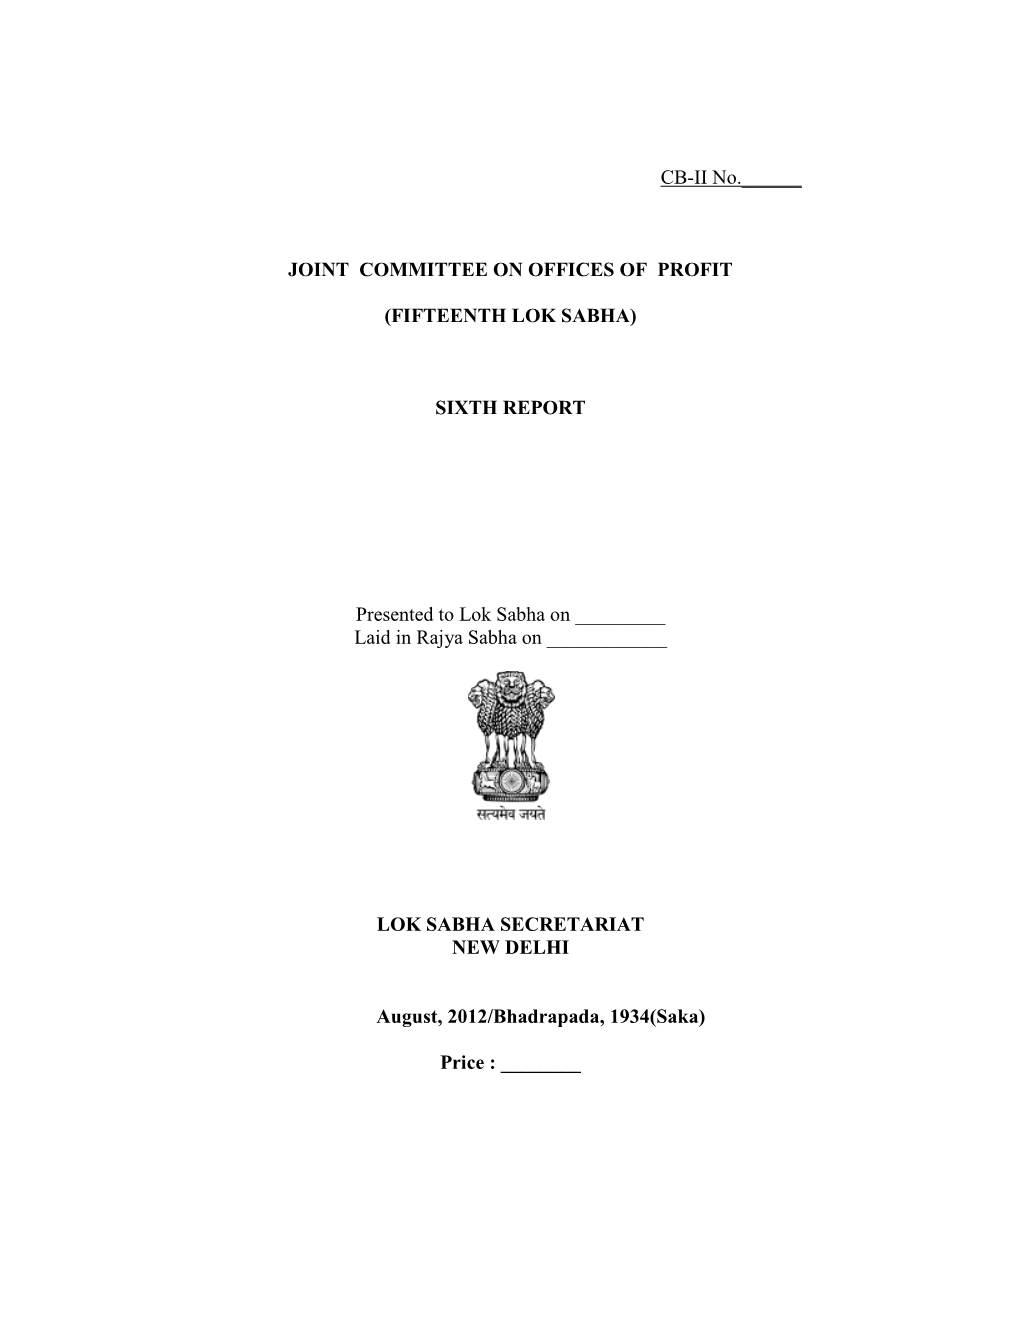 CB-II No.___JOINT COMMITTEE on OFFICES of PROFIT (FIFTEENTH LOK SABHA) SIXTH REPORT Presented to Lok Sabha on ___